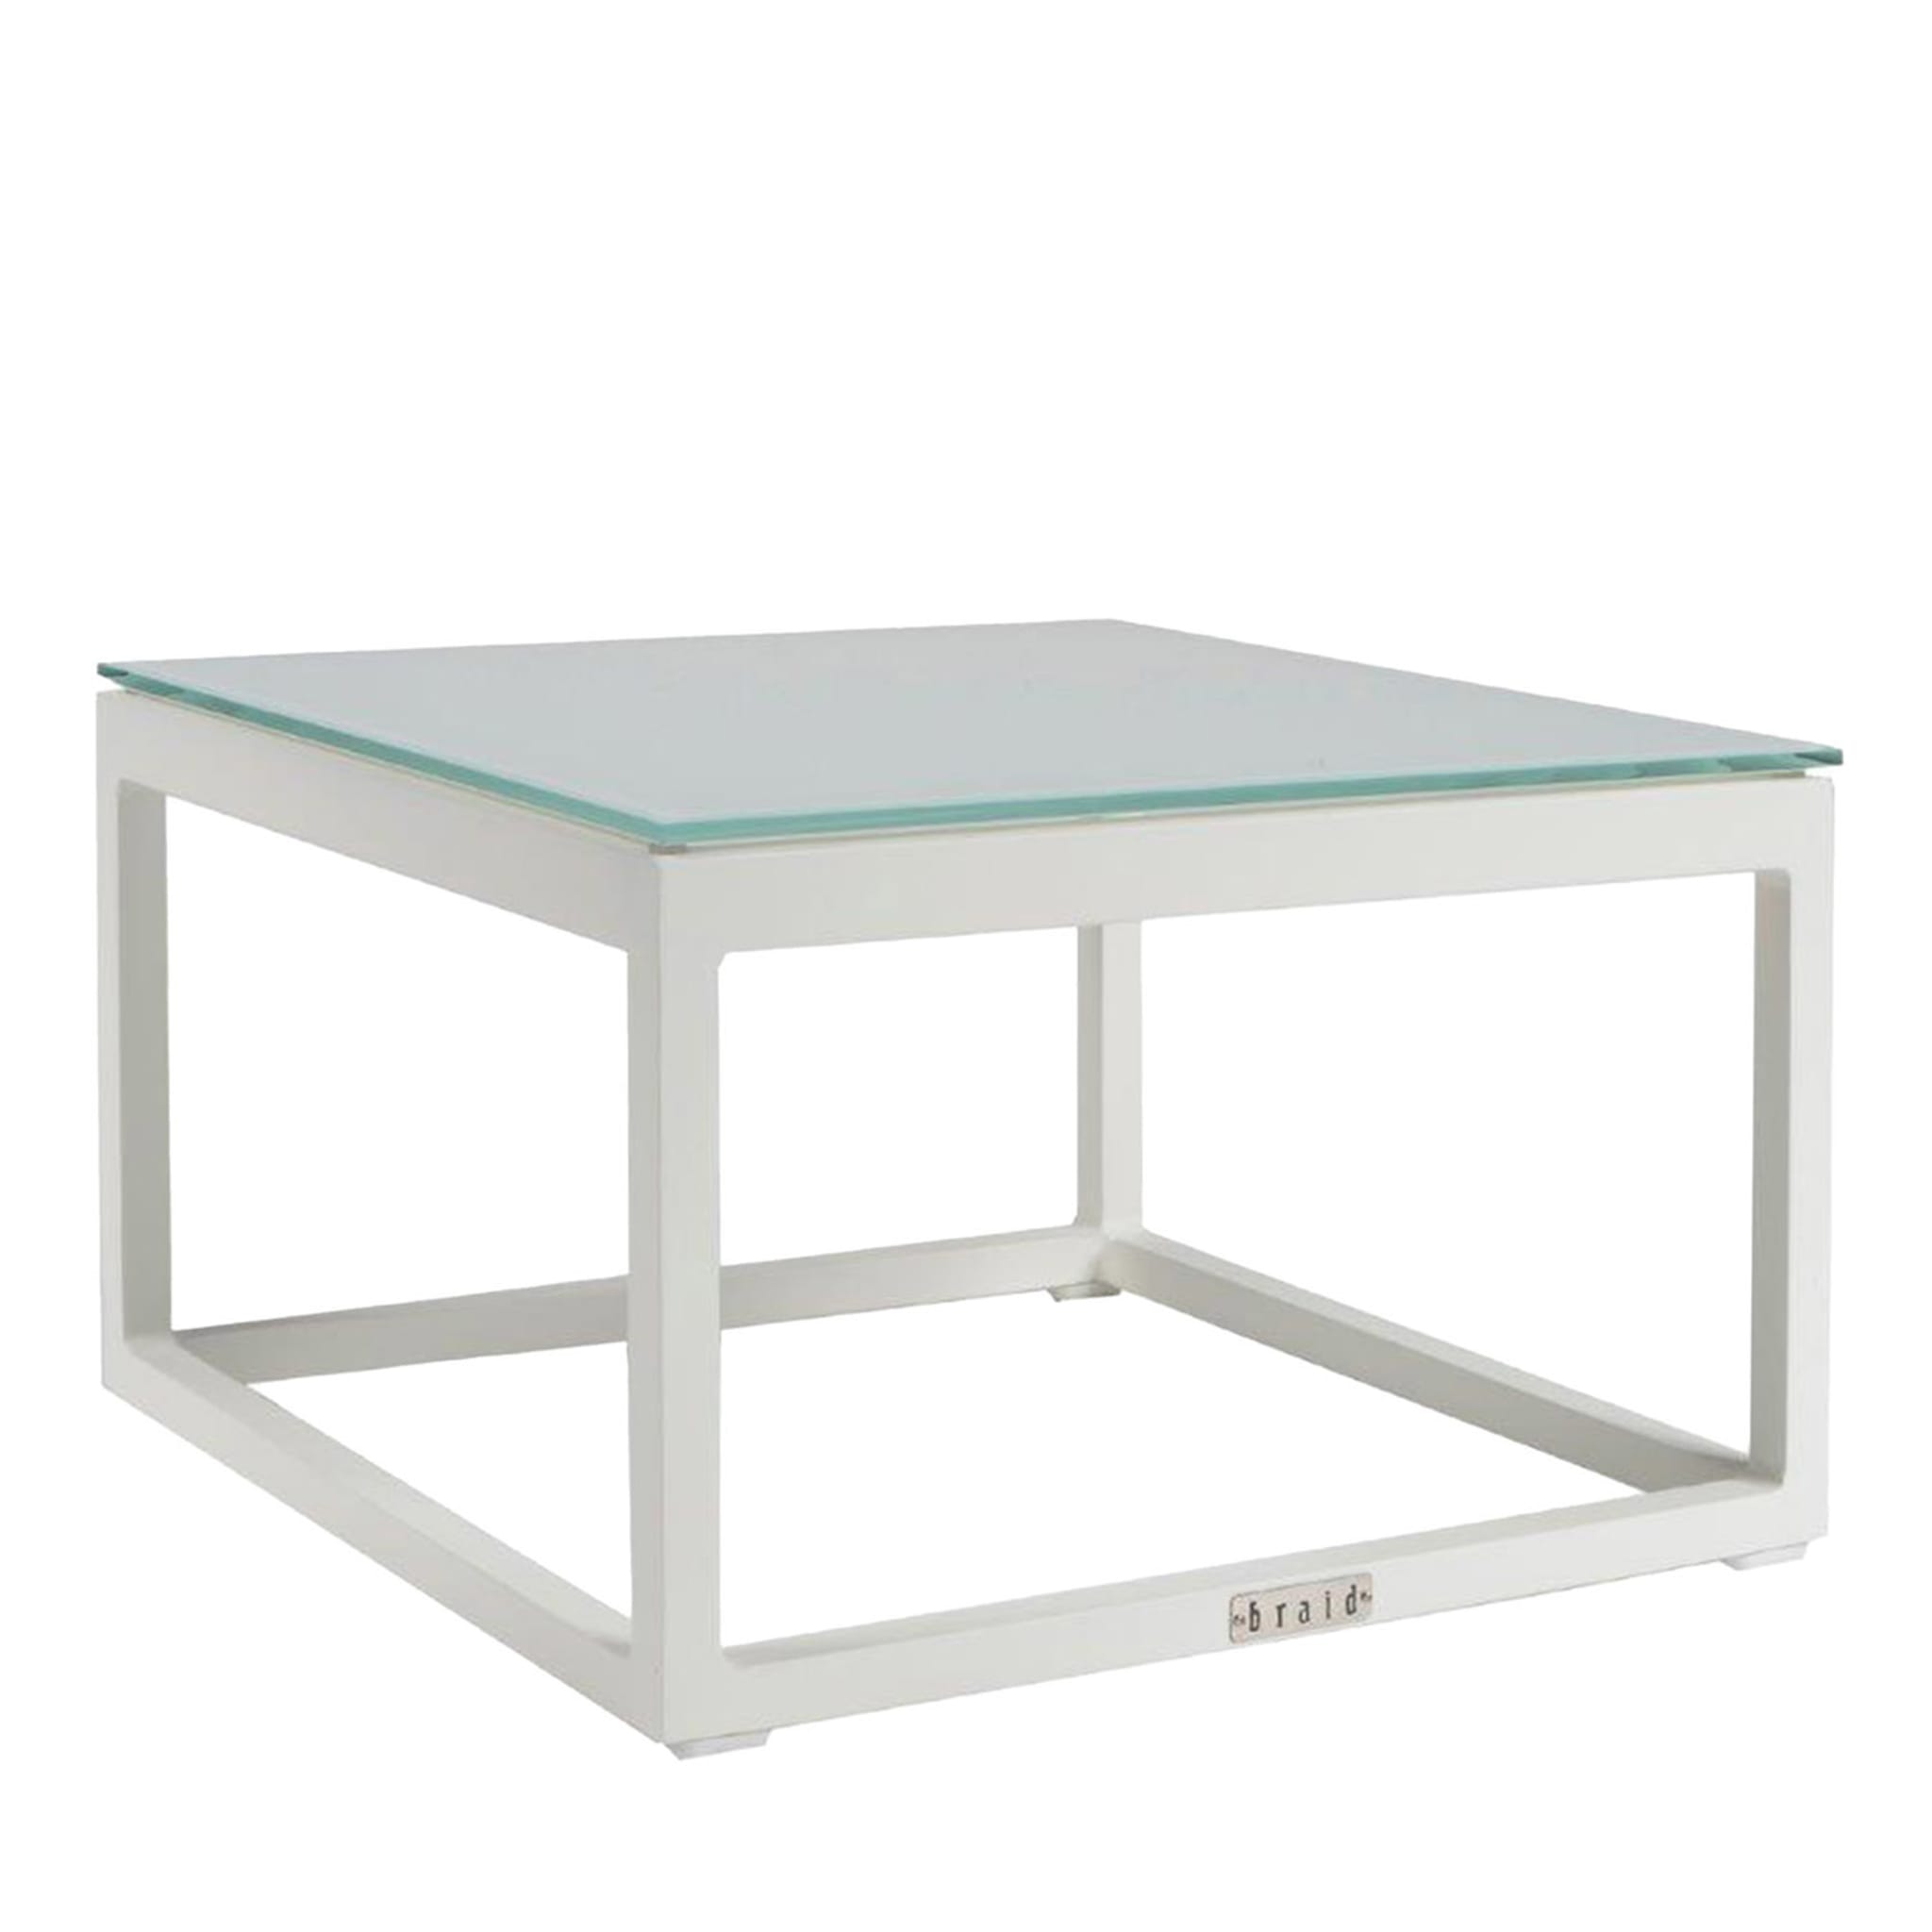 Metropolitan Square White Coffee Table by Carlo Colombo #2 - Main view